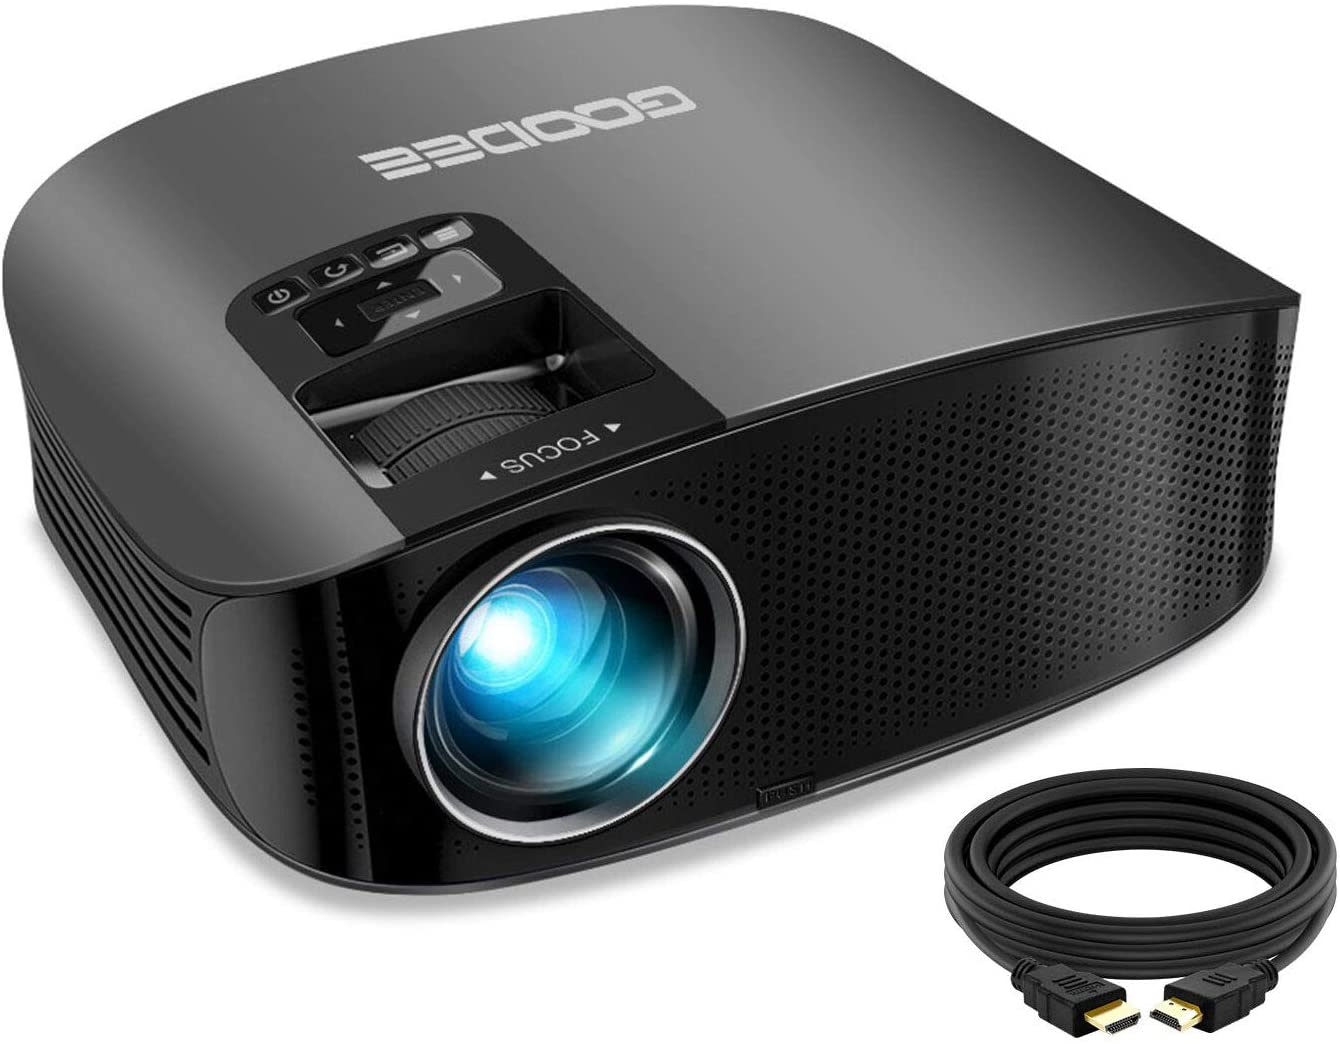 GooDee Video Projector (Best Projector Under 250 To Buy From Amazon):